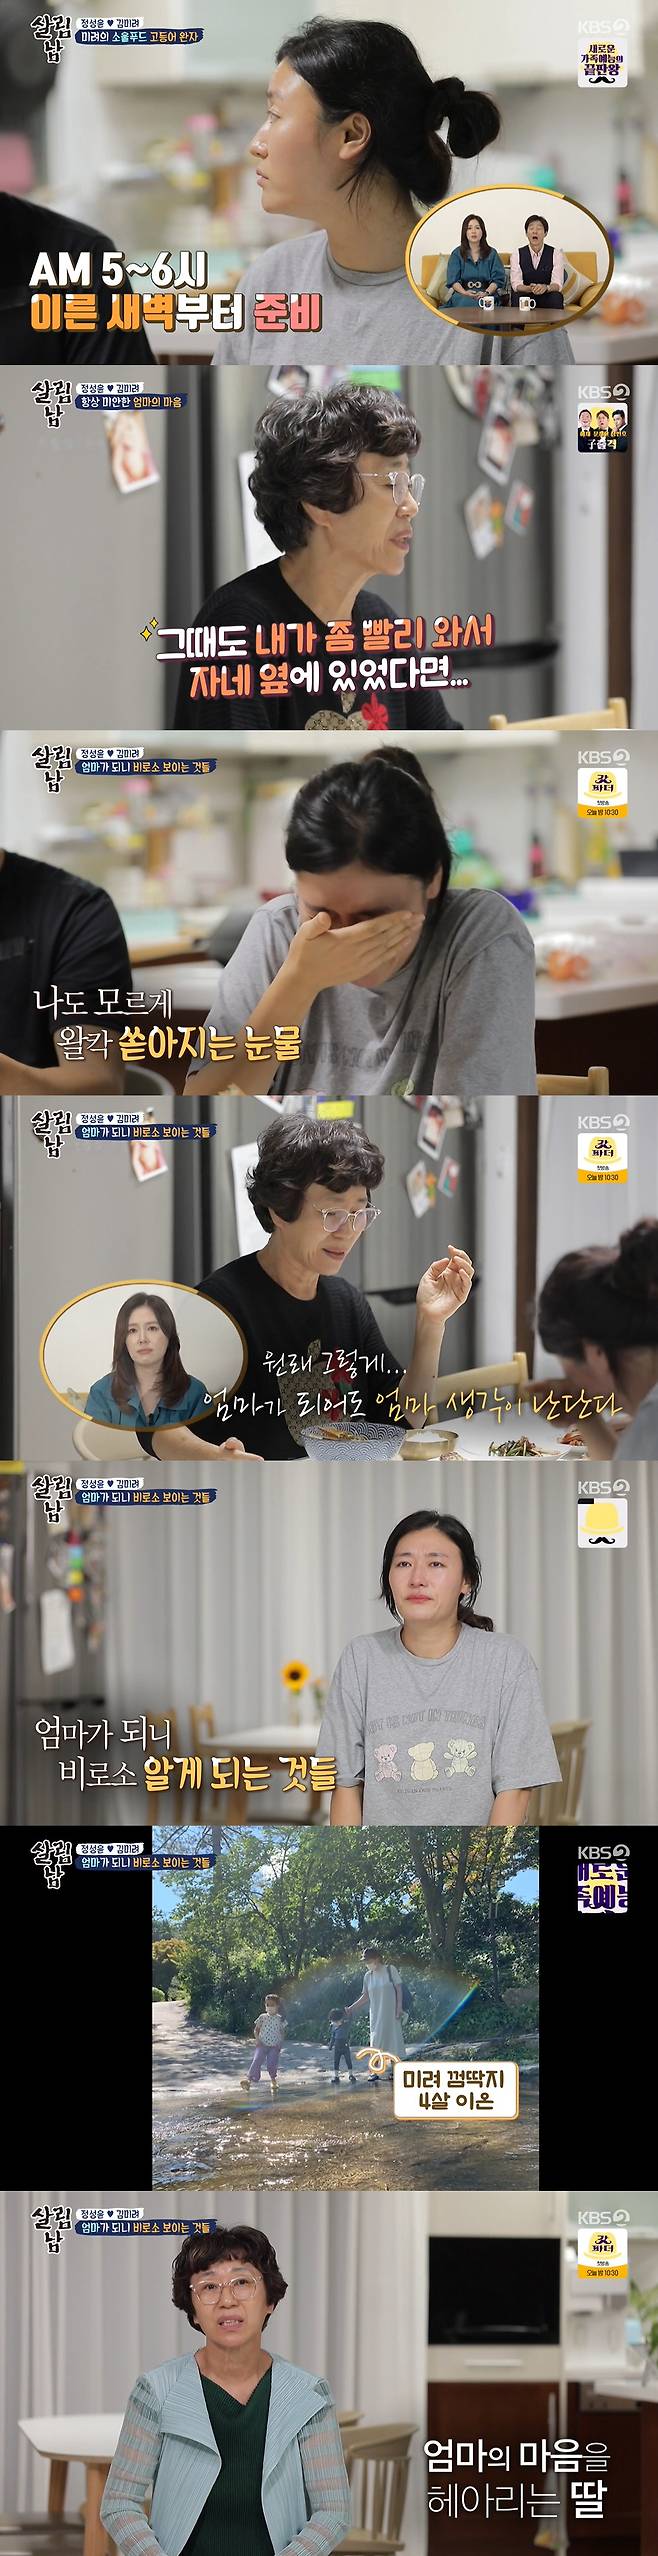 Kim Mi-Ryeo, a Salim Nam broadcaster, gave thank you to Mother who touched her heart.On KBS2s Saving Men Season 2 (hereinafter referred to as Mr. House Husband 2), which aired on the 2nd, the daily lives of Kim Mi-Ryeo and Jung Sung-Yoon were revealed.Kim Mi-Ryeo Mother came to Kim Mi-Ryeos house on the day, saying, My beauty is so busy that I have only contacted her by text.I came home because I was frustrated. Mothers bag was heavy with side dishes, vegetables, kimchi, etc. Kim Mi-Ryeo told Mother, When will I just come?But Mother expressed her heart for her daughter, saying she also squeezed sesame oil.Jung Sung-Yoon surprised Kim Mi-Ryeo, who eats side dishes too well, saying, I think my stomach is all better. Mother then said, I check with my health checkup and work.Im always worried about it. Im sure it hurt because of the ions, he said.I am worried that if my daughter is sick, she can not cook after birth. I had to go to a big hospital as soon as I gave birth to Ion.Kim Mi-Ryeos second son, Ion, was diagnosed with congenital collagen deficiency at the time of childbirth, when a hole was found in his mouth as soon as he was born and was rushed to a large hospital.Fortunately, I am growing well now.Meanwhile, Kim Mi-Ryeo, who visited the hospital, told the doctor, There is a small polyp in the gallbladder.If you are 1cm or more, you will have to do surgery because it is small and it is not bad shape, so you will see it again in a year.There are a lot of people. The doctor also said, Tumour is visible on the thyroid, but not a malicious tumour.The size is 1.25cm, so I think I should do a follow-up test after six months. He said, The stomach is clean and there is no fatty liver. At that time Kim Mi-Ryeo Mother started cleaning at Kim Mi-Ryeos house without a break.Mother said to herself, Its disgusting Kim Mi-Ryeo Jung Sung-Yoon! But said, What should I do? Its my mother. Its my mother.Kim Mi-Ryeo, who returned home, admired, saying, The house has become a Model house.Mother was delighted to hear Kim Mi-Ryeos health checkup results and said, Ill do something delicious.While Kim Mi-Ryeo was on schedule, Mother and Jung Sung-Yoon bought dinner ingredients for the market.Kim Mi-Ryeo, who returned home, expressed his gratitude to Mother for saying, Lets deliver it, I knew it would be like this.Kim Mi-Ryeo dined and said: My mom would wake up from 5 to 6am and pack lunch boxes; there was a machine that could go for a mackerel.Mom thought it was really great. Mother said, My brother and sister did not say that. Even though Im not going to talk about it, Ionie grows up lovingly and tells me, and the West has been suffering a lot.I would have been willing if I had come together soon. He again apologized to the two people who took care of the ion without confidence.Kim Mi-Ryeo then broke down tears after confiding, I think of my mother when Im having a hard time looking at the children, and Mother also stole tears and said,  (when) I think of my mother.In the meantime, Jung Sung-Yoon laughed when he noticed that he did not stop eating.Mum is like a great man - raising children, starting a family and feeling more, Kim Mi-Ryeo said in an interview.Mother said, I thought my daughter was getting older, but I did not express it on the outside, but I have a child and I express it like that.